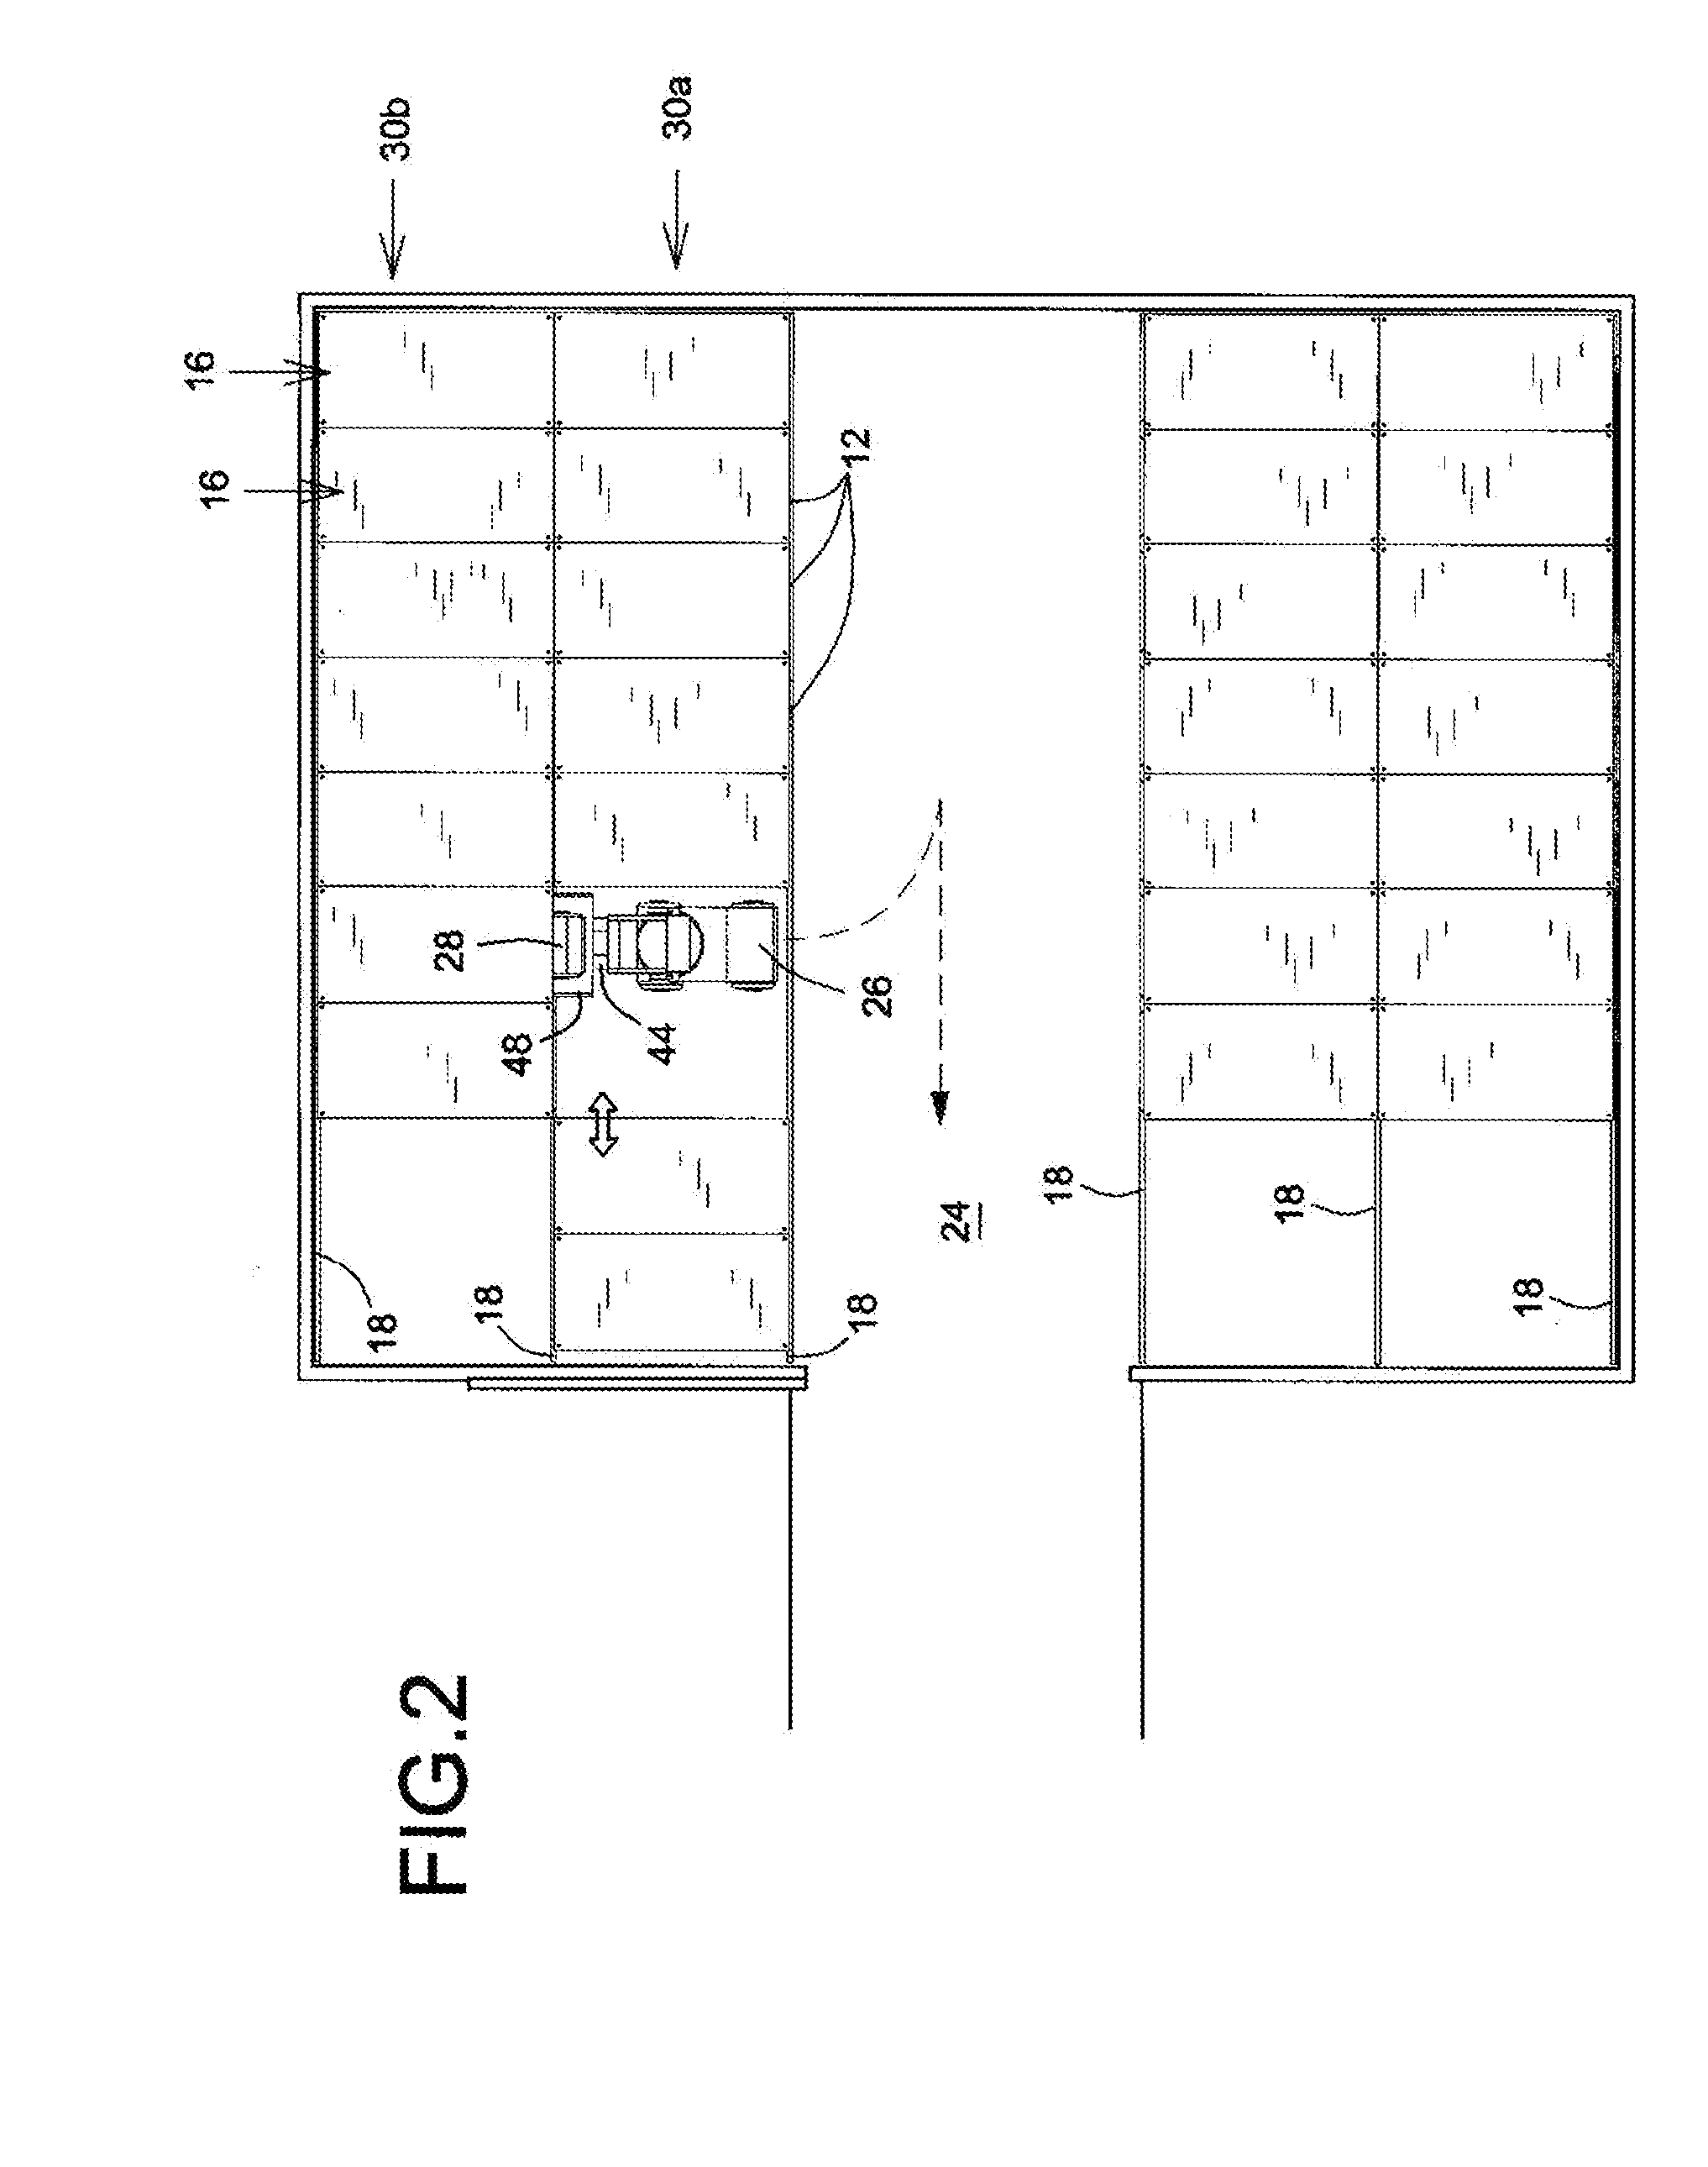 Multi-level parking lot and method